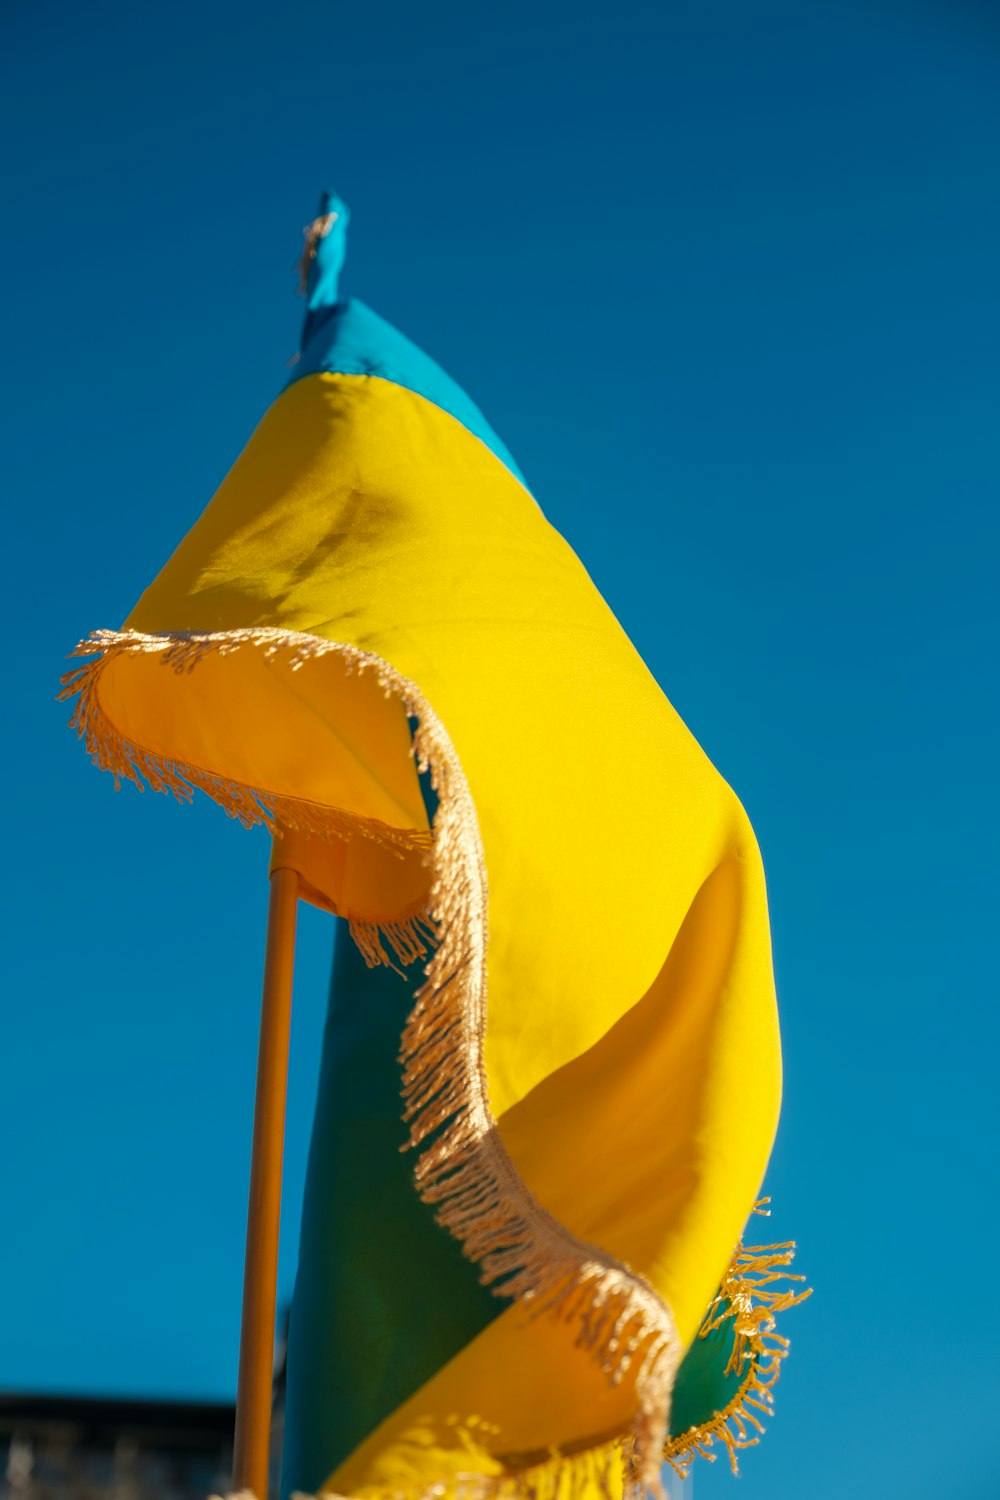 a yellow and green umbrella with a blue sky in the background